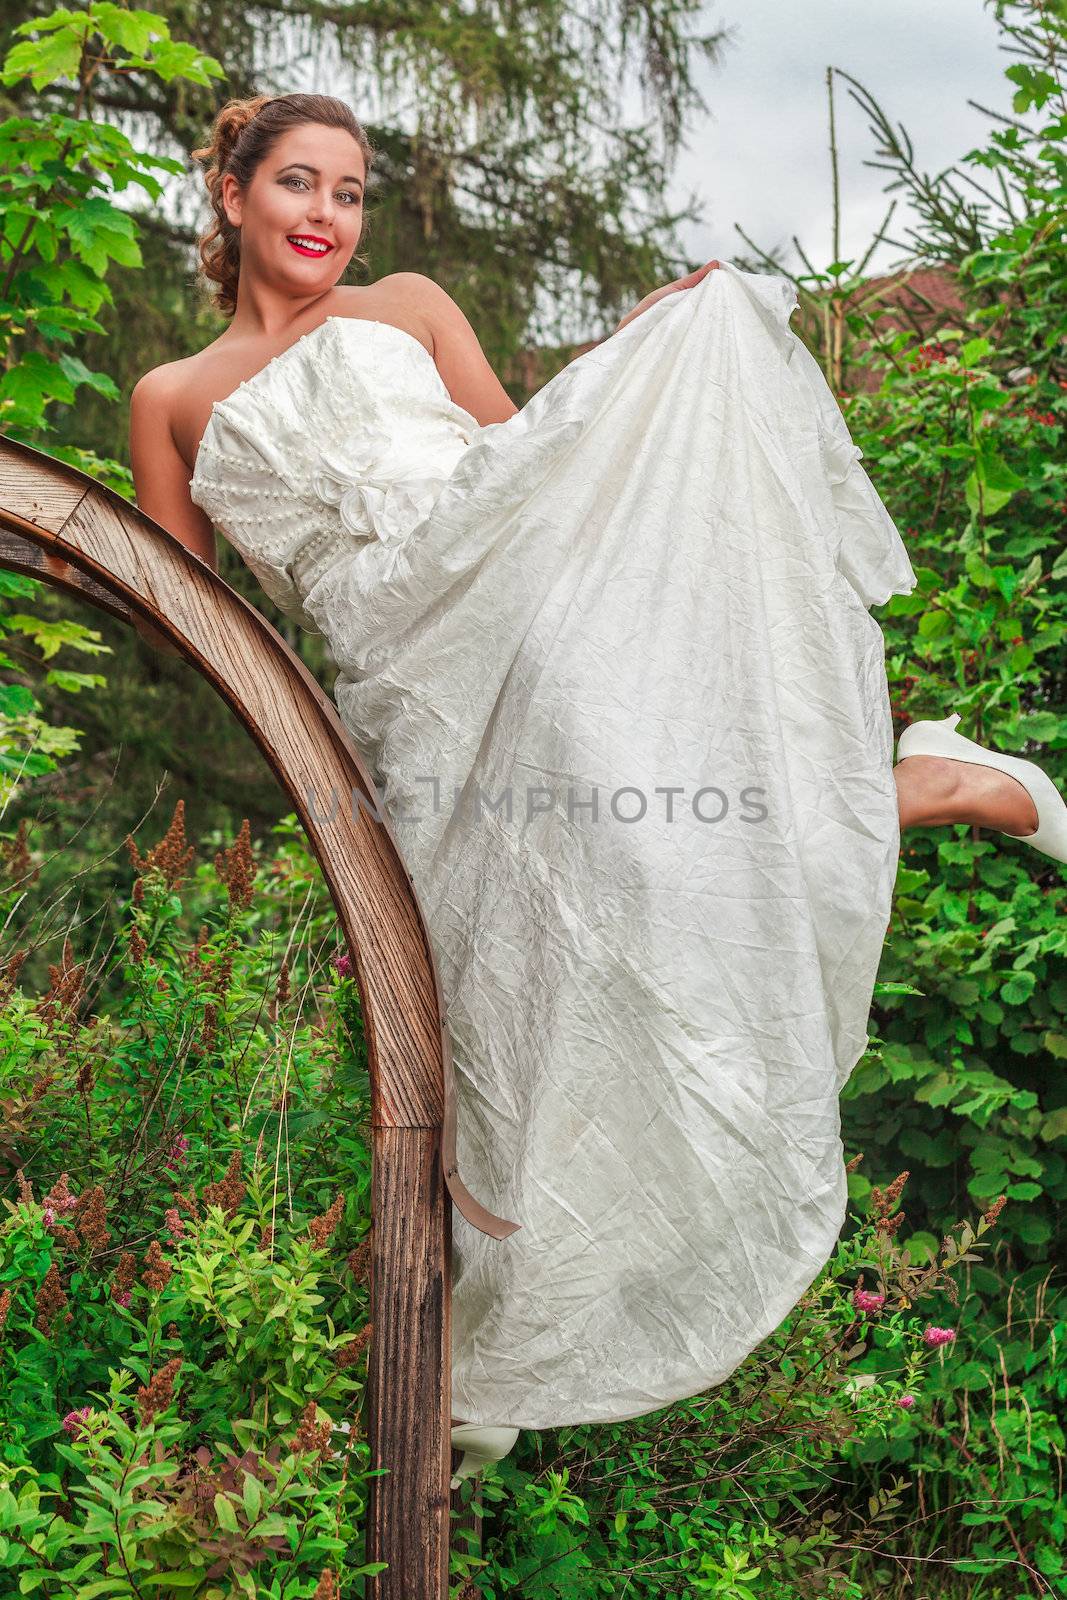 Beautiful bride in her wedding gown posing in a lush green garden with a joyful smile on her face